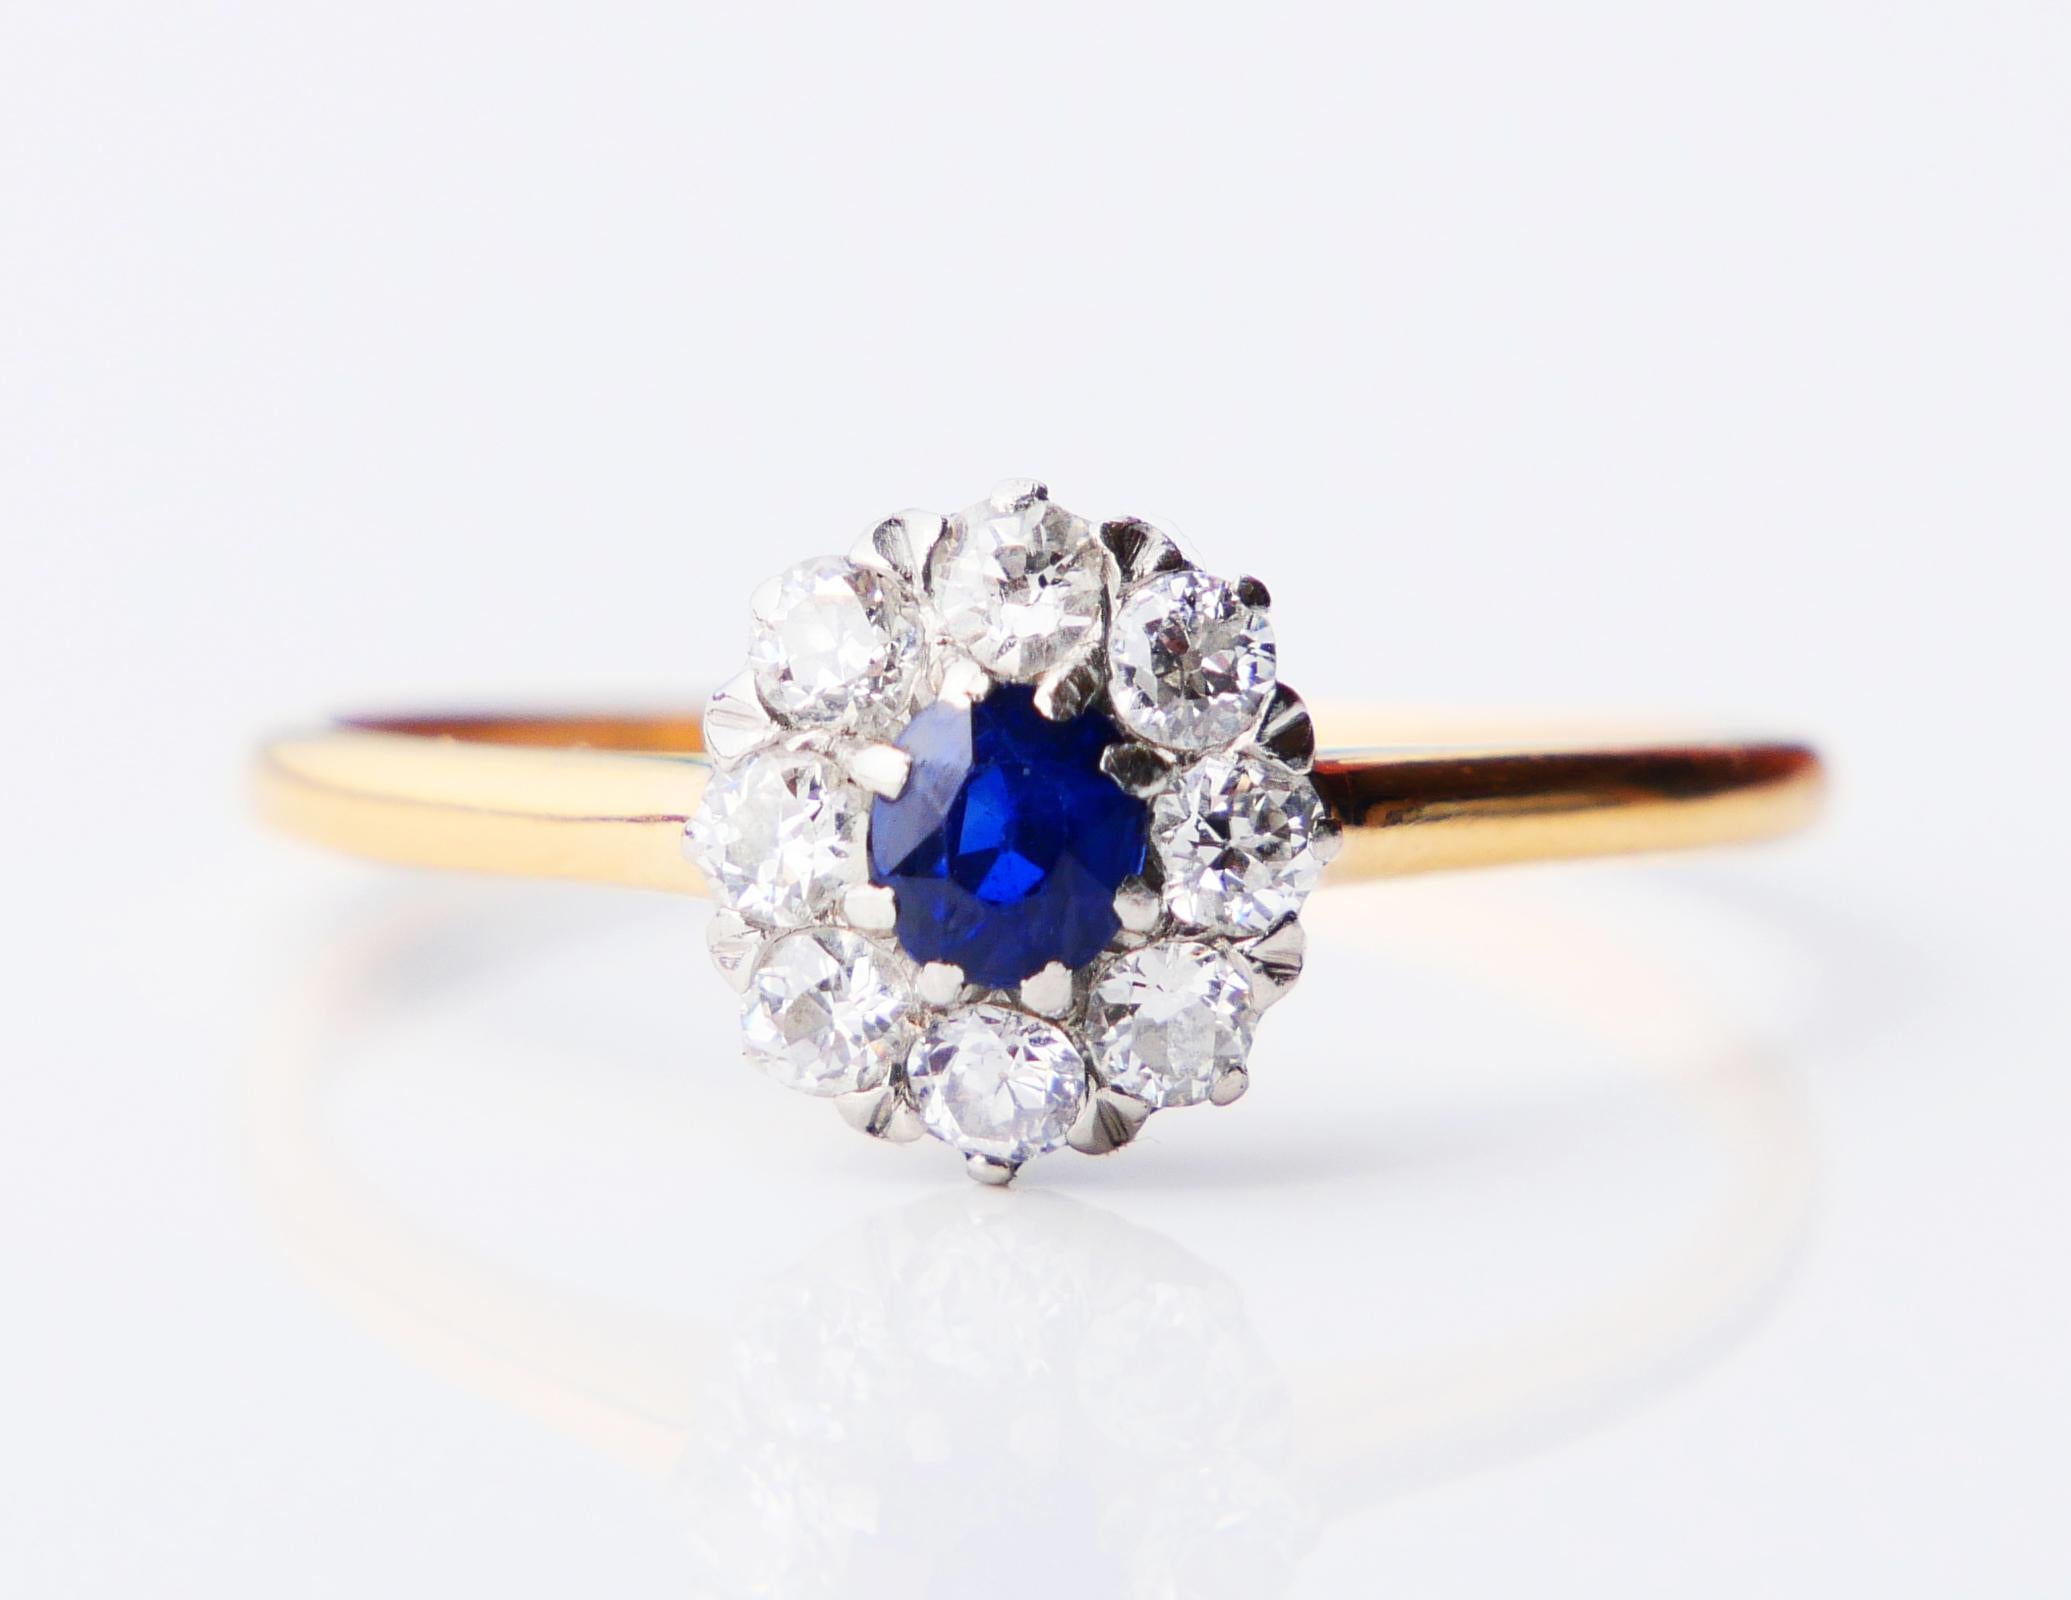 Beautiful 108-year-old Halo Ring in solid 18K Yellow Gold with natural Blue Sapphire and 8 old European cut Diamonds in Platinum settings.

Natural Sapphire of old European diamond cut, color is medium Blue demonstrates inclusions and distinctive